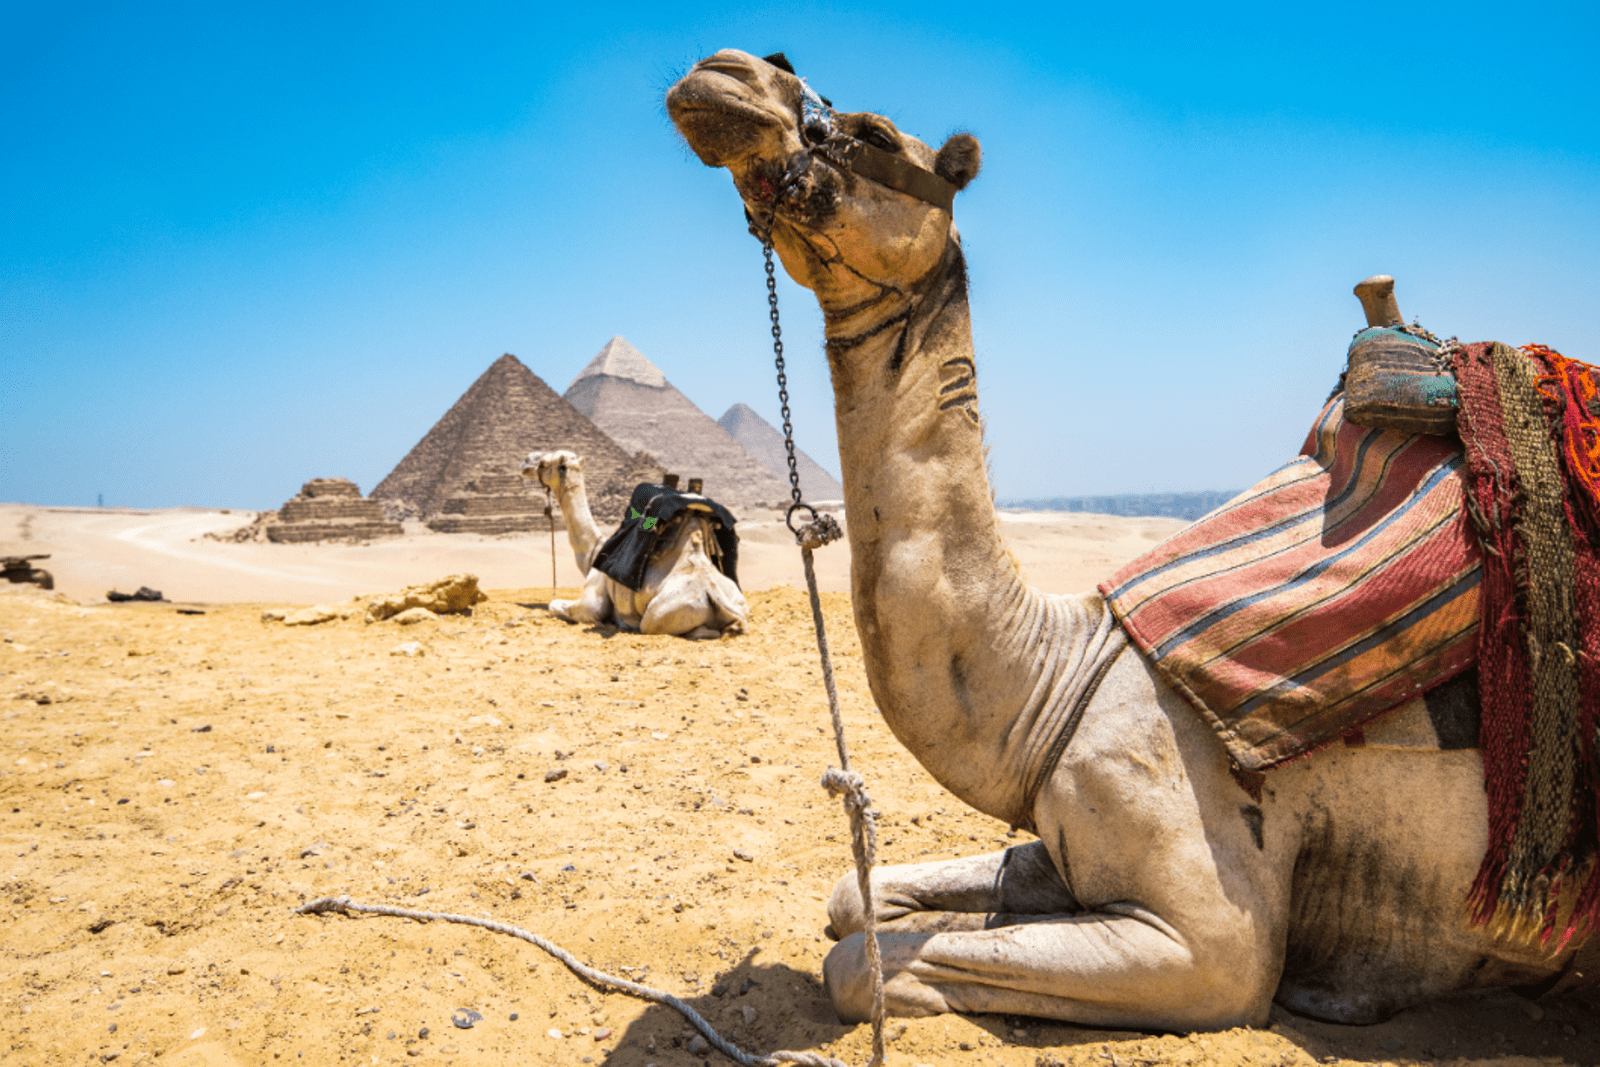 A camel resting near the pyramids in Egypt